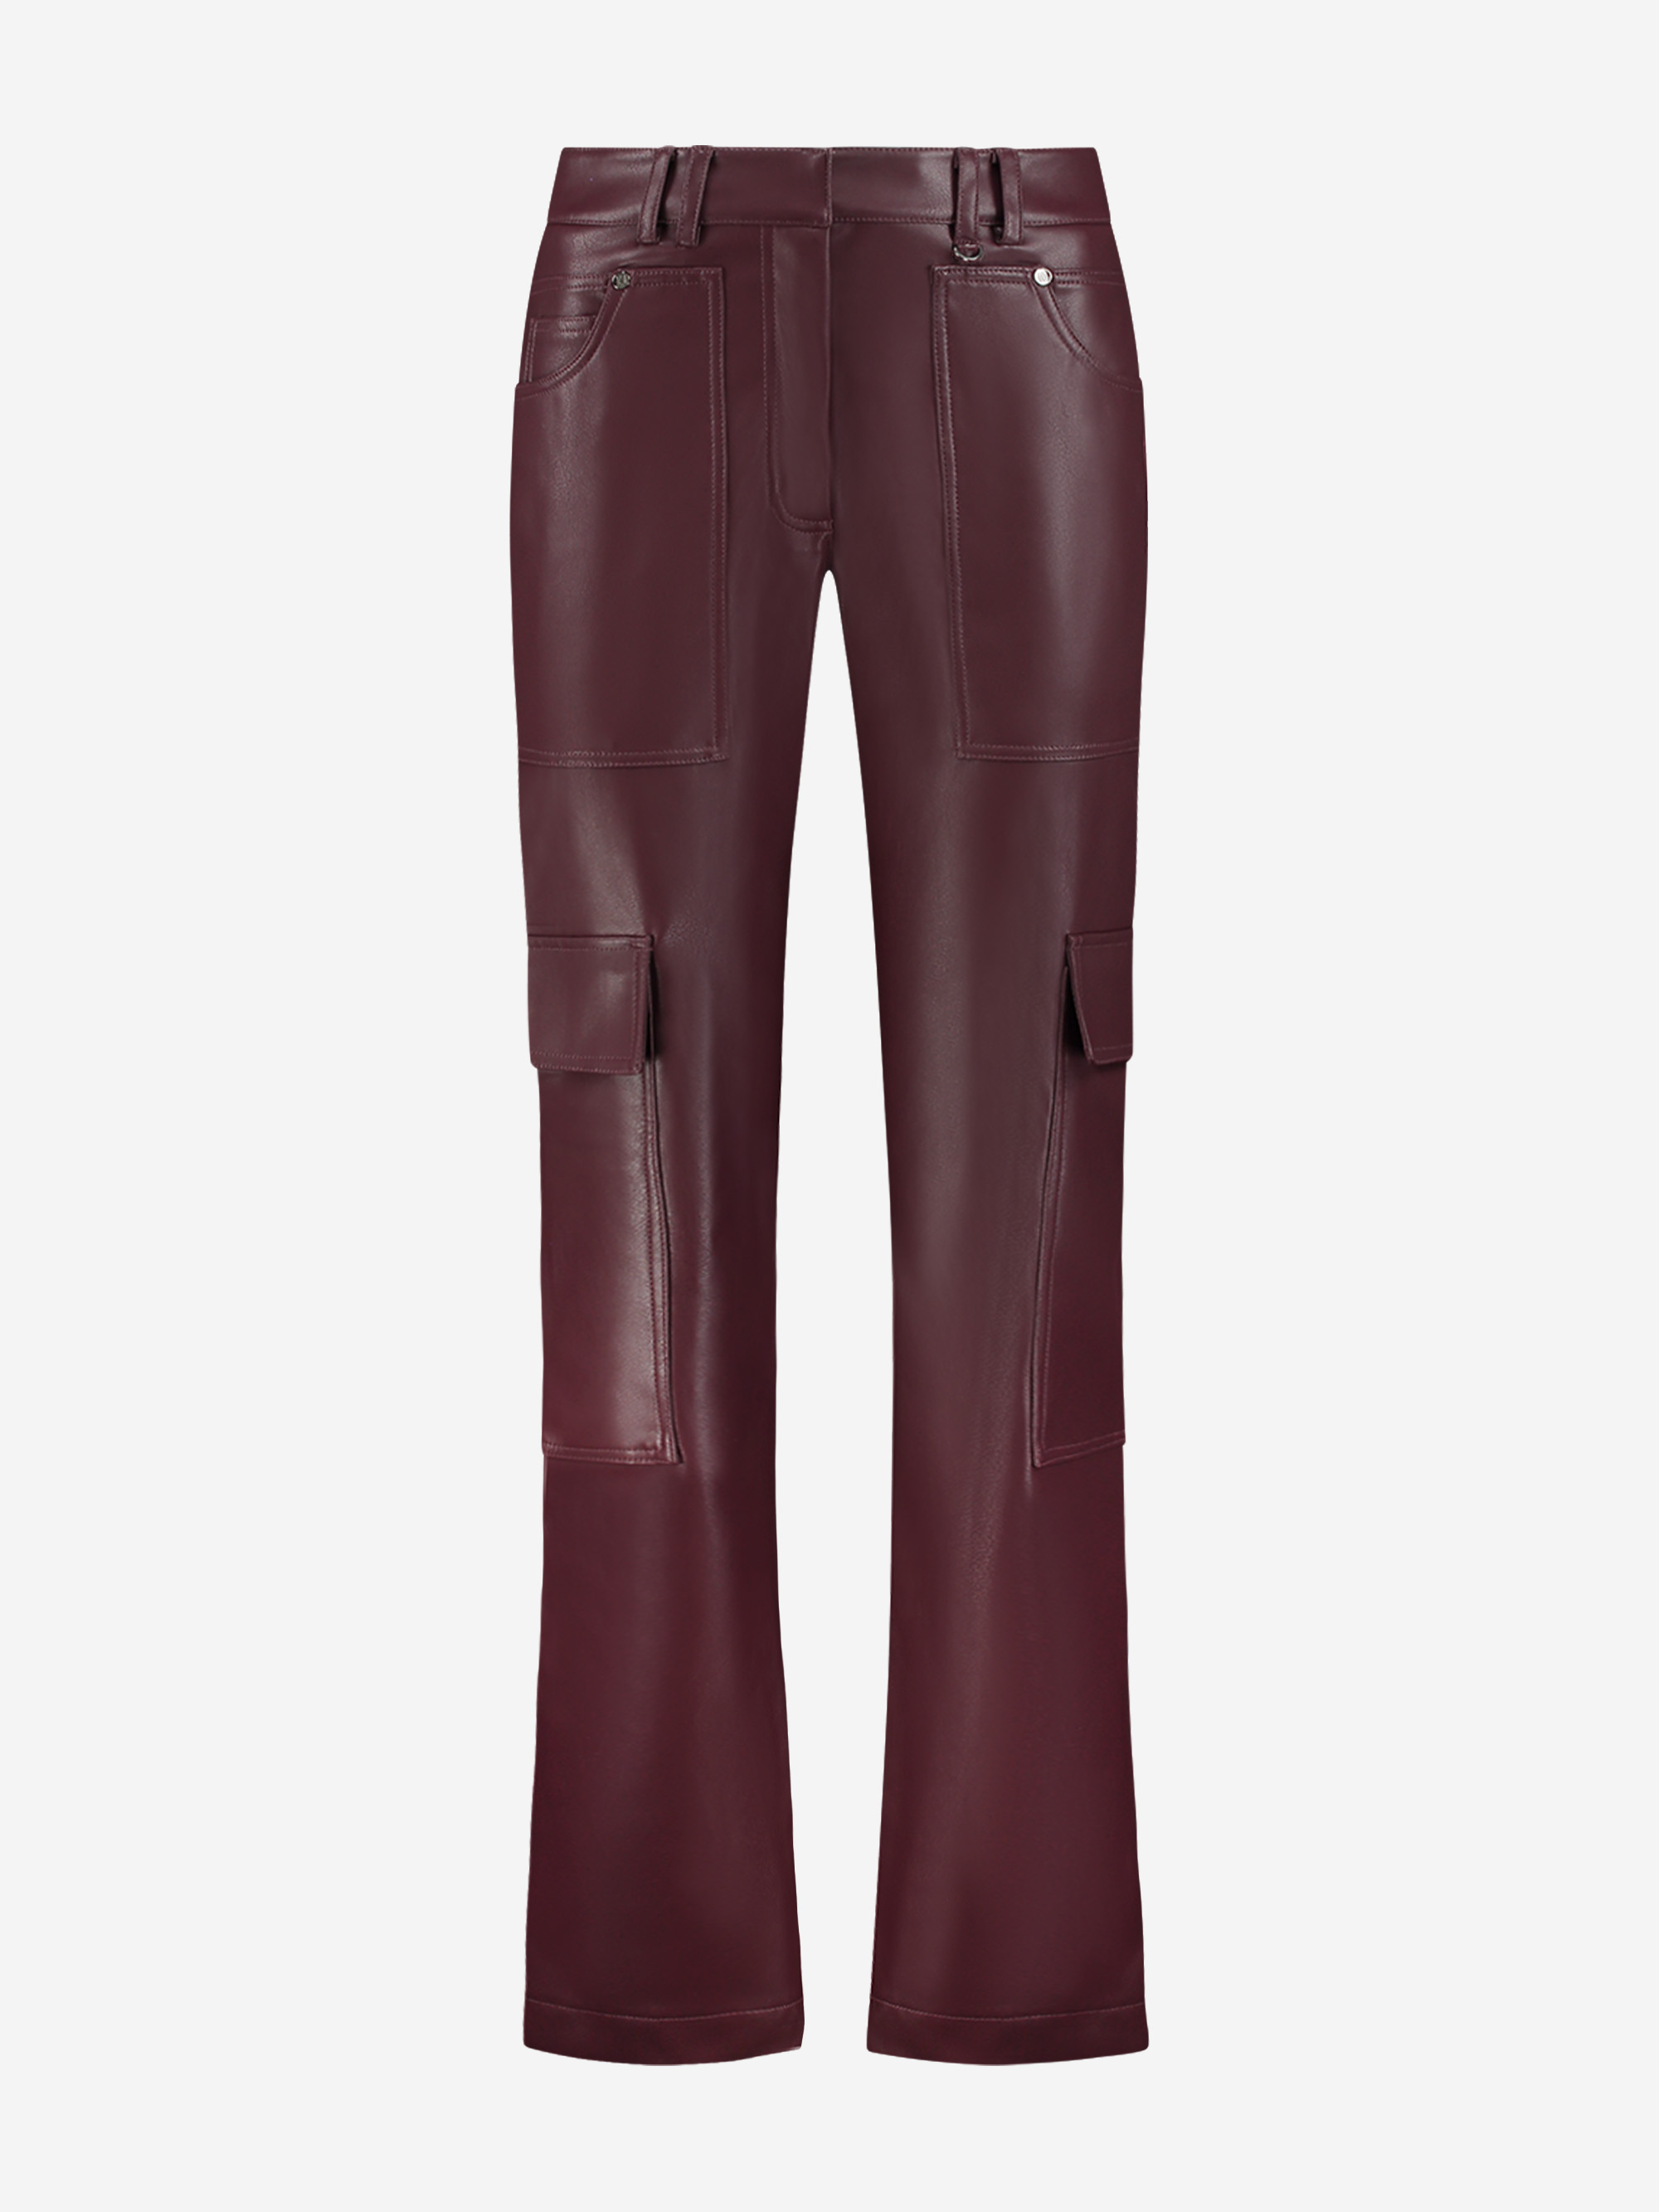 Straight vegan leather cargo pants with Mid rise